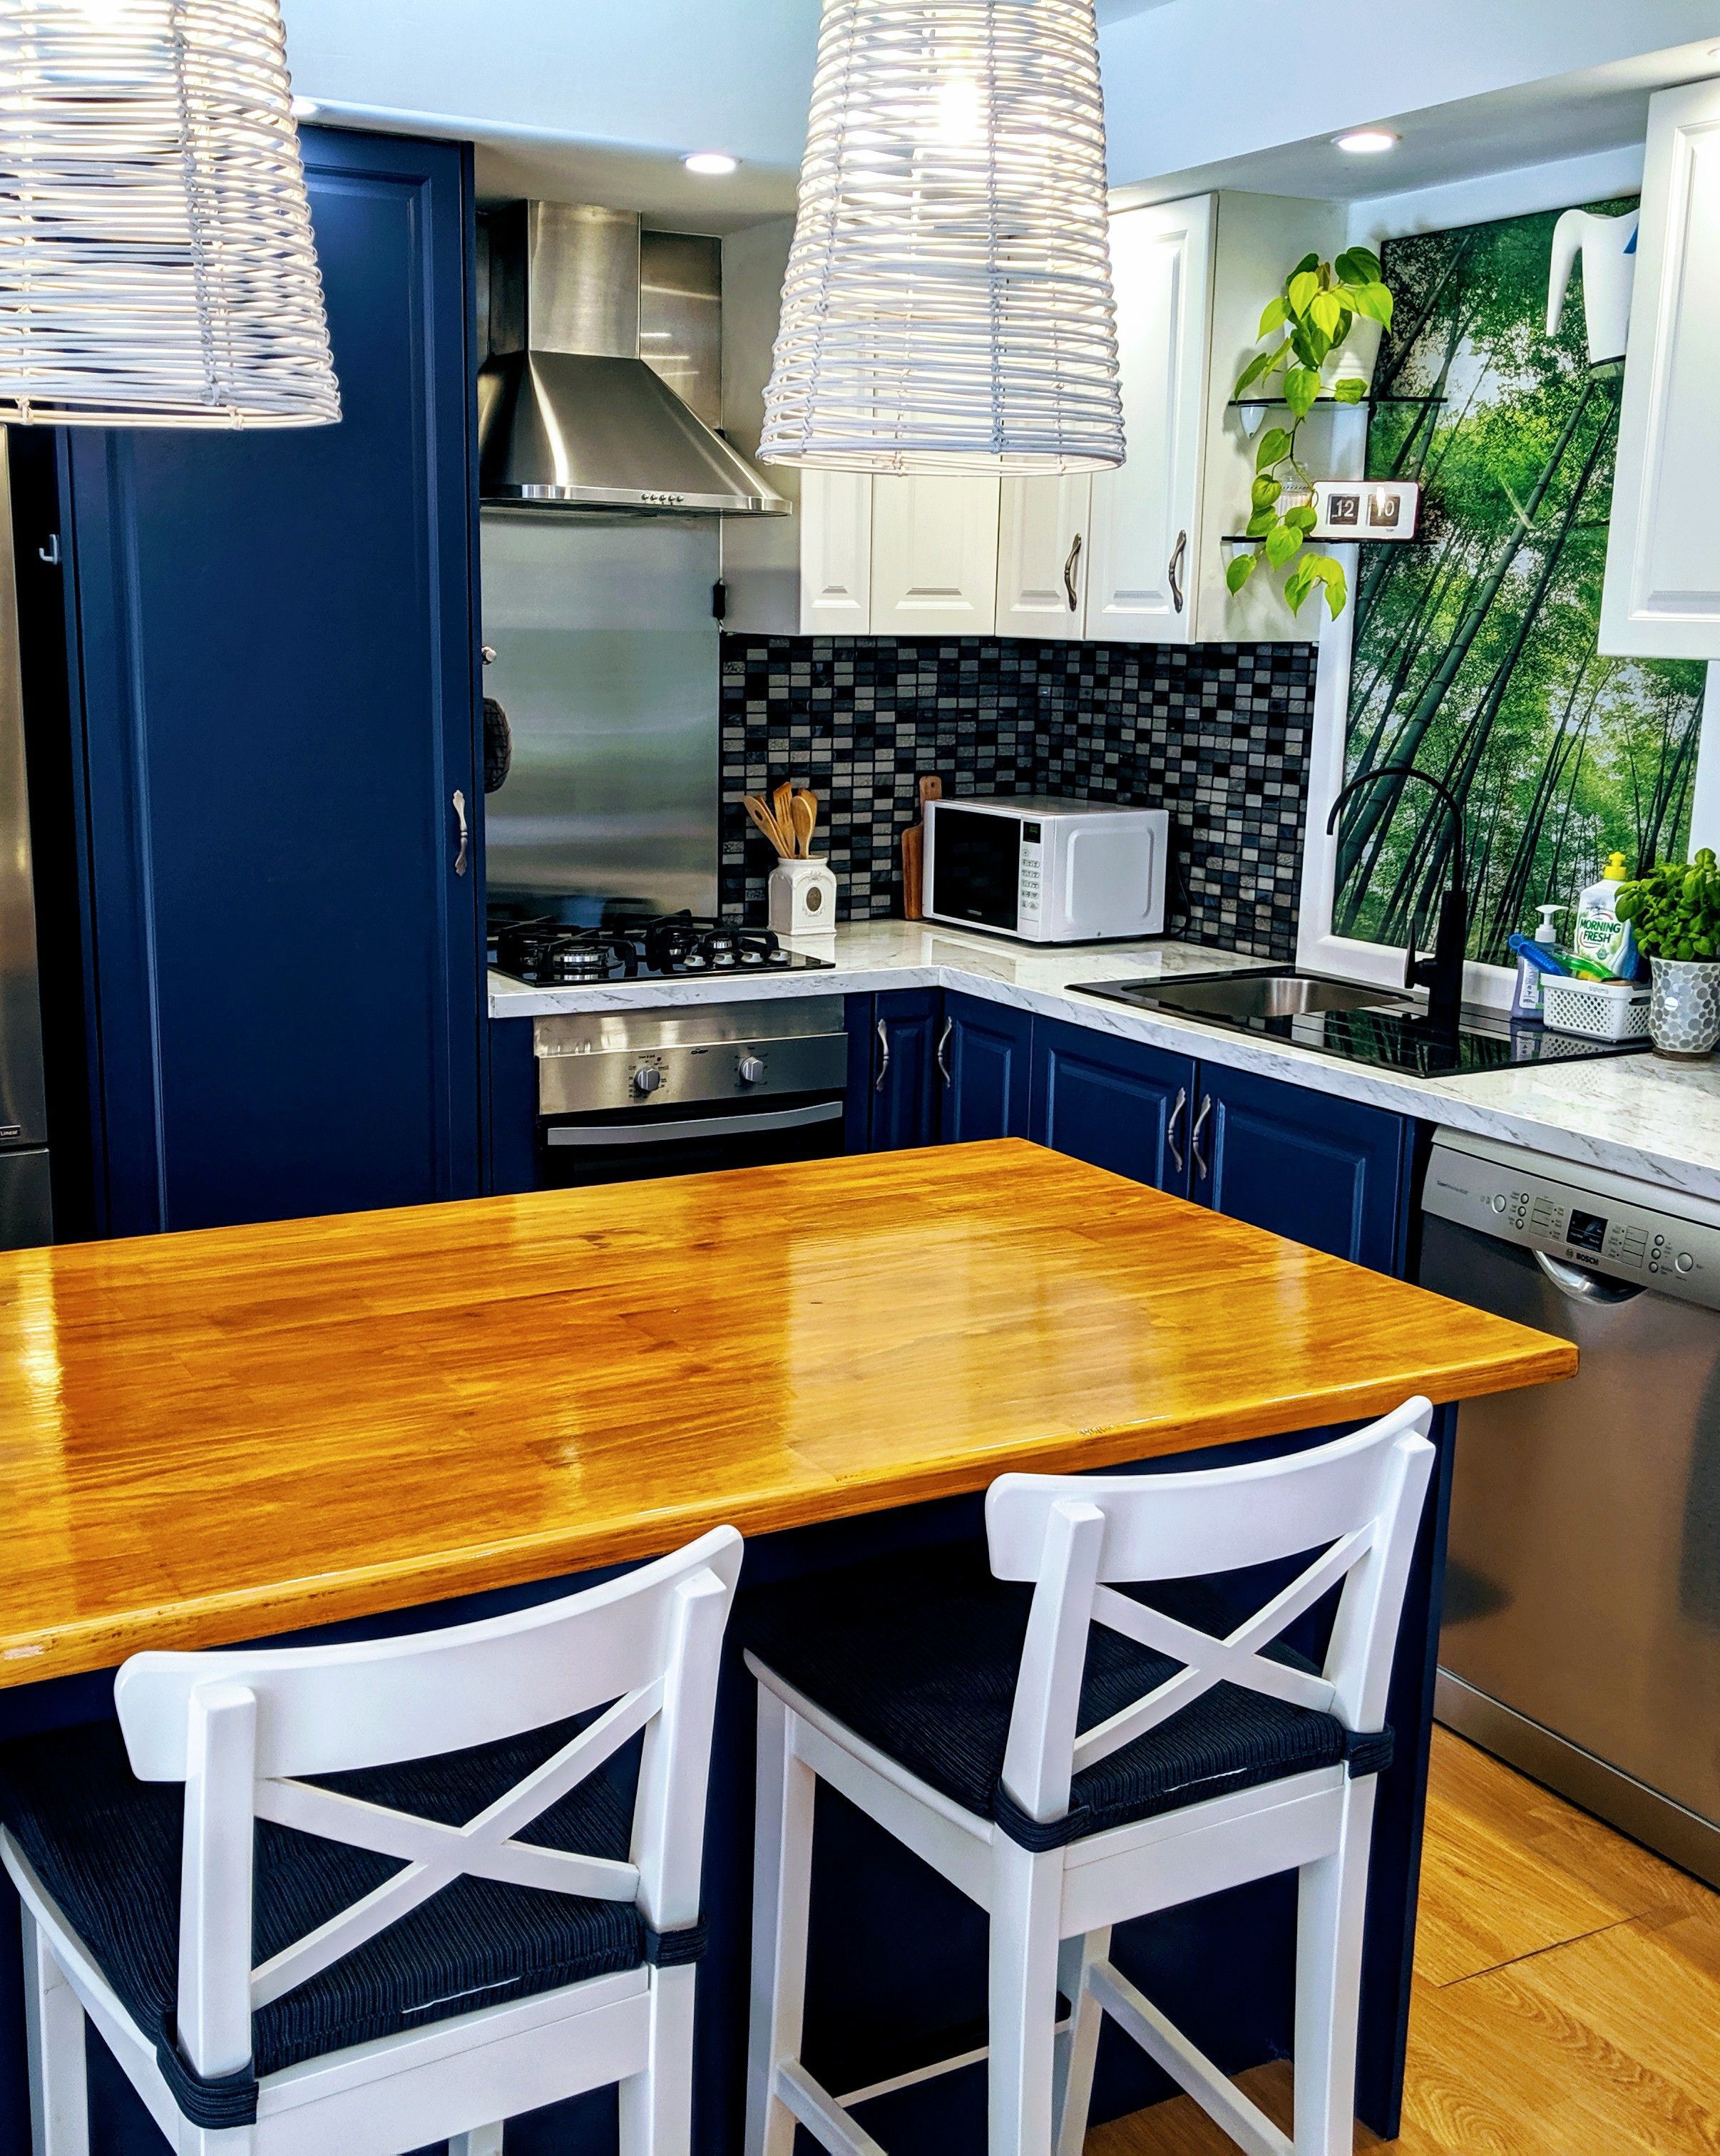 Top 10 most popular kitchen projects | Bunnings Workshop community